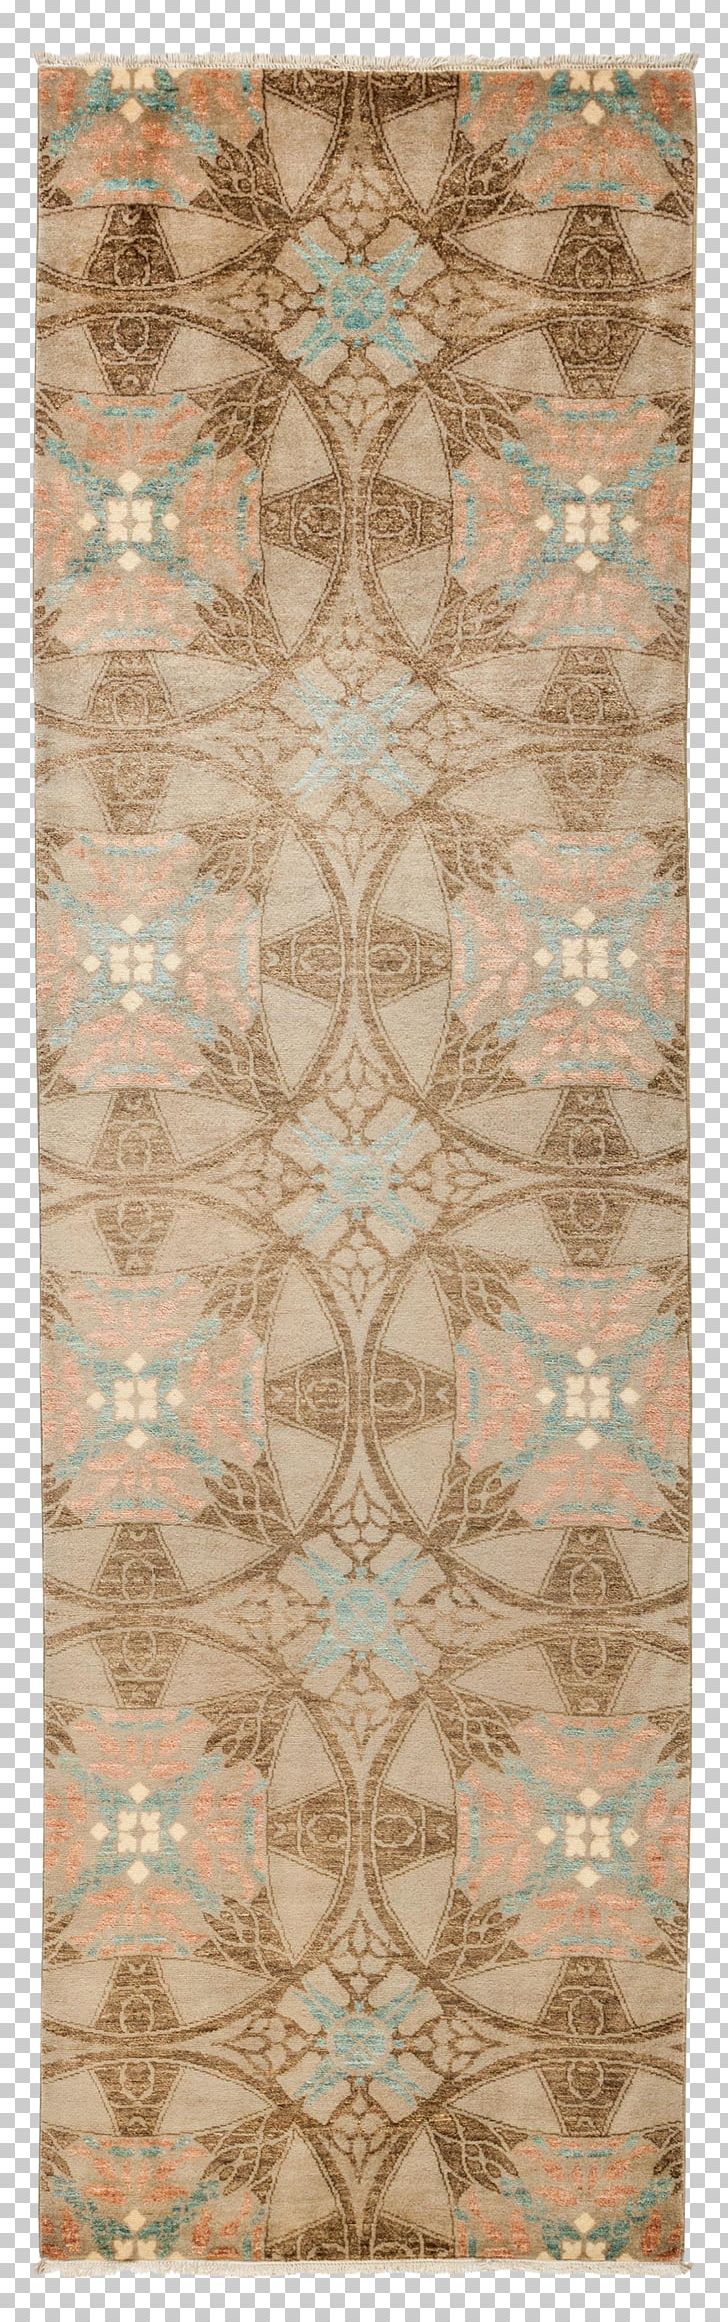 Carpet Suzani Brown Beige Lace PNG, Clipart, Area, Beige, Brown, Carpet, Cartesian Coordinate System Free PNG Download